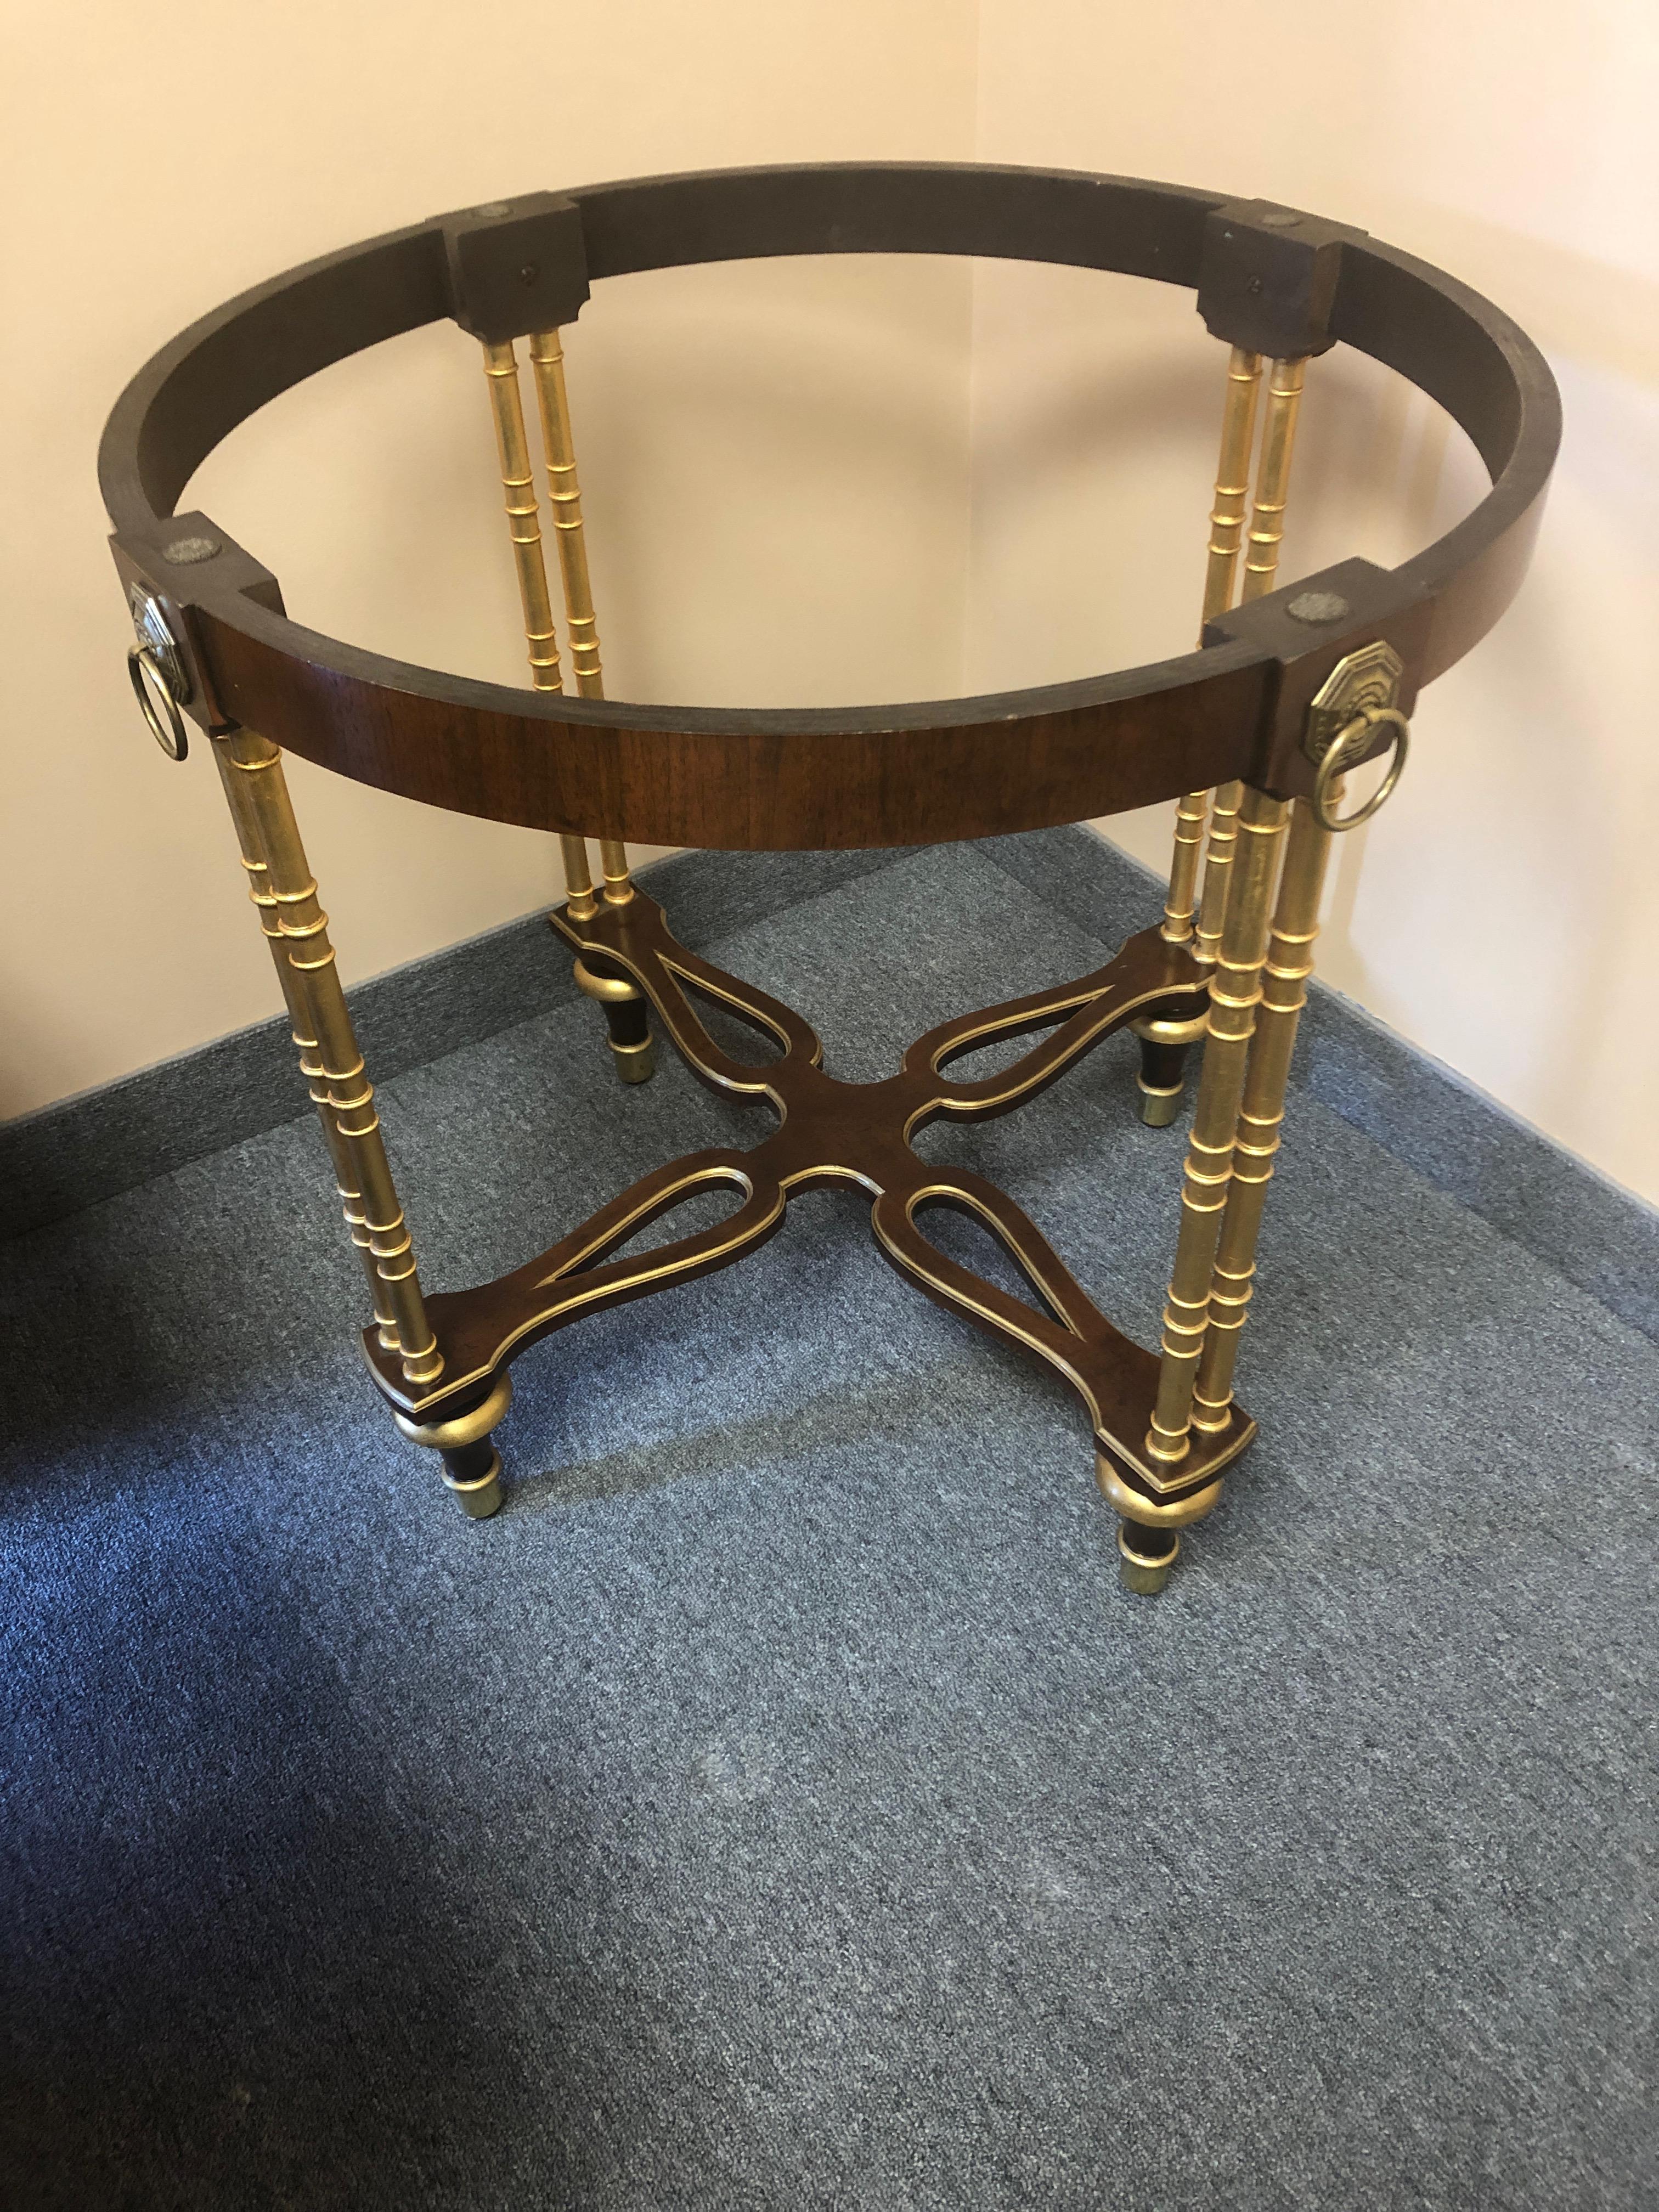 Medium sized versatile very elegant round side table having mahogany and gilded base with black and white marble top edged in brass.
Baker McMillan Collection label underneath.